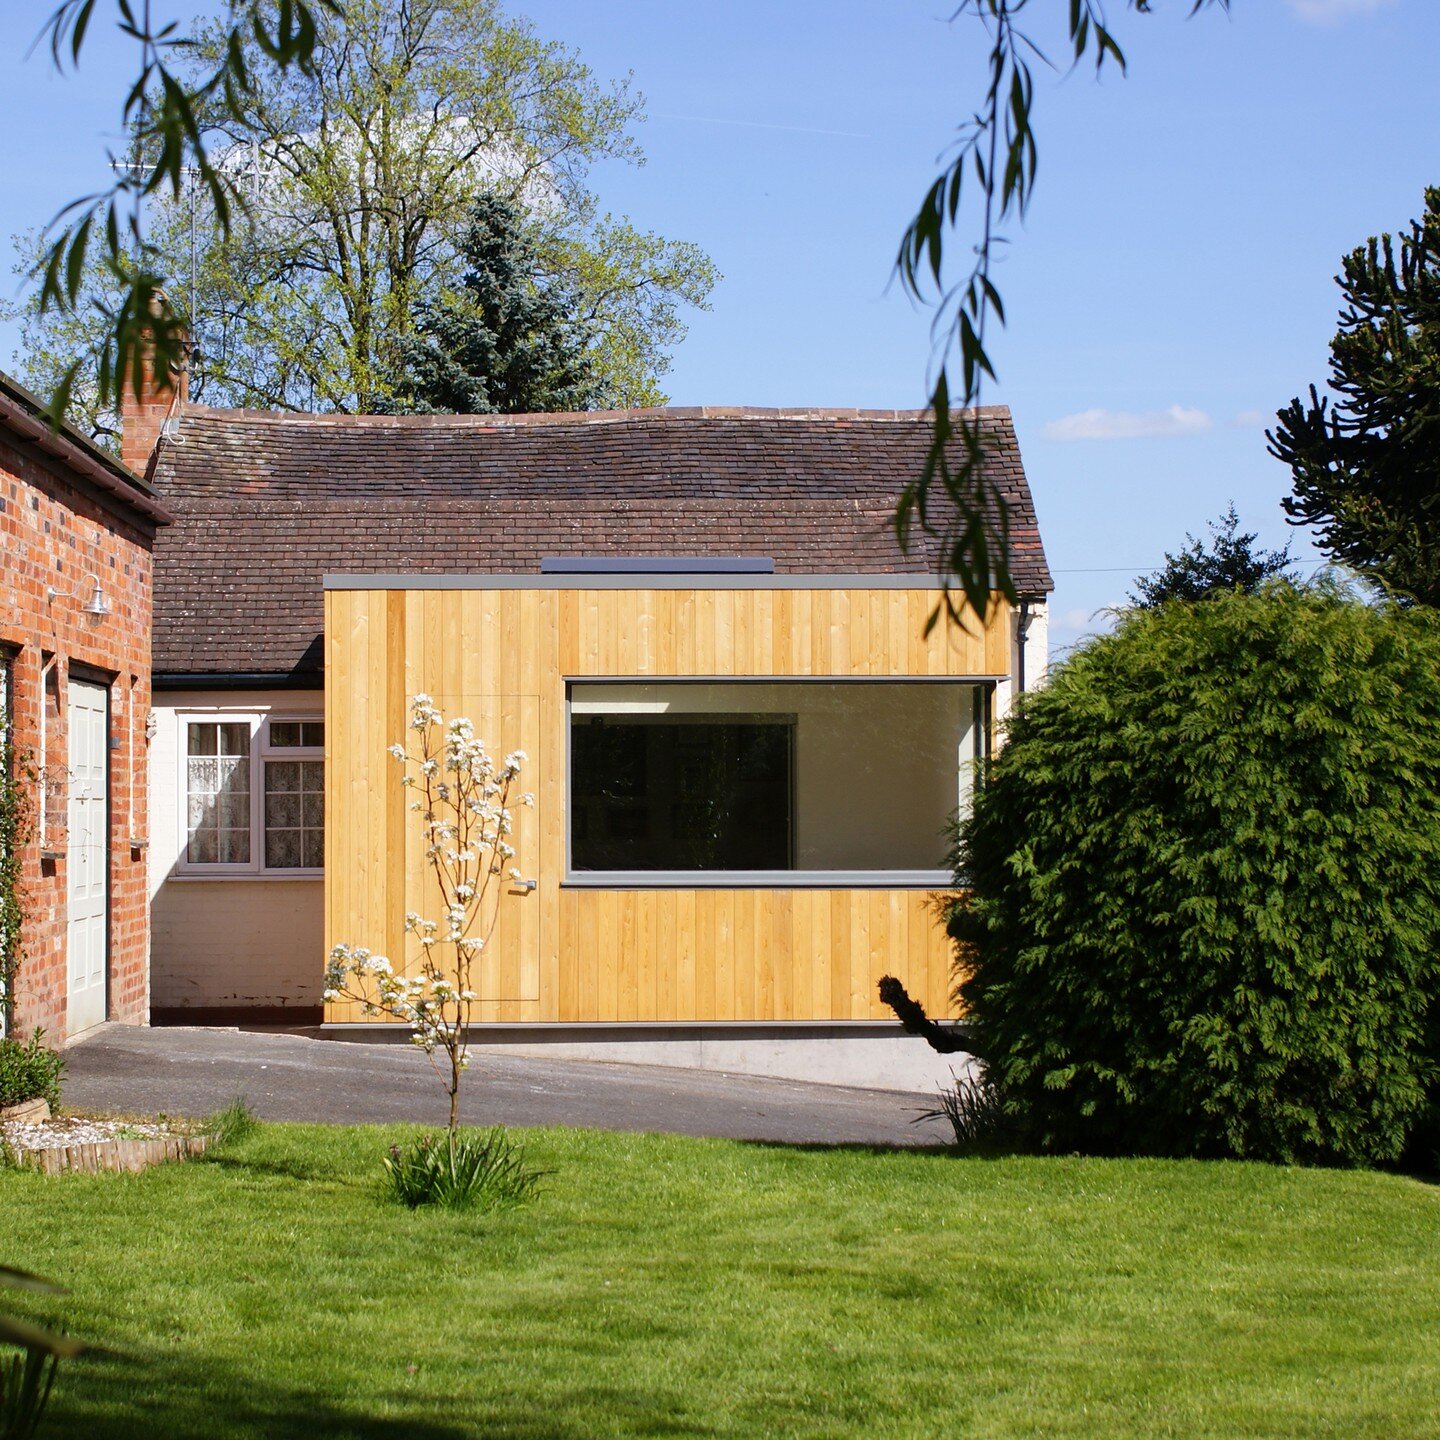 Timber clad artist studio in the heart of Great Malvern. A small space to an historic cottage perfectly formed making the most of the natural light and views towards the garden.
#studio #malvern #timbercladding #cornerwindow #architecture #contempora